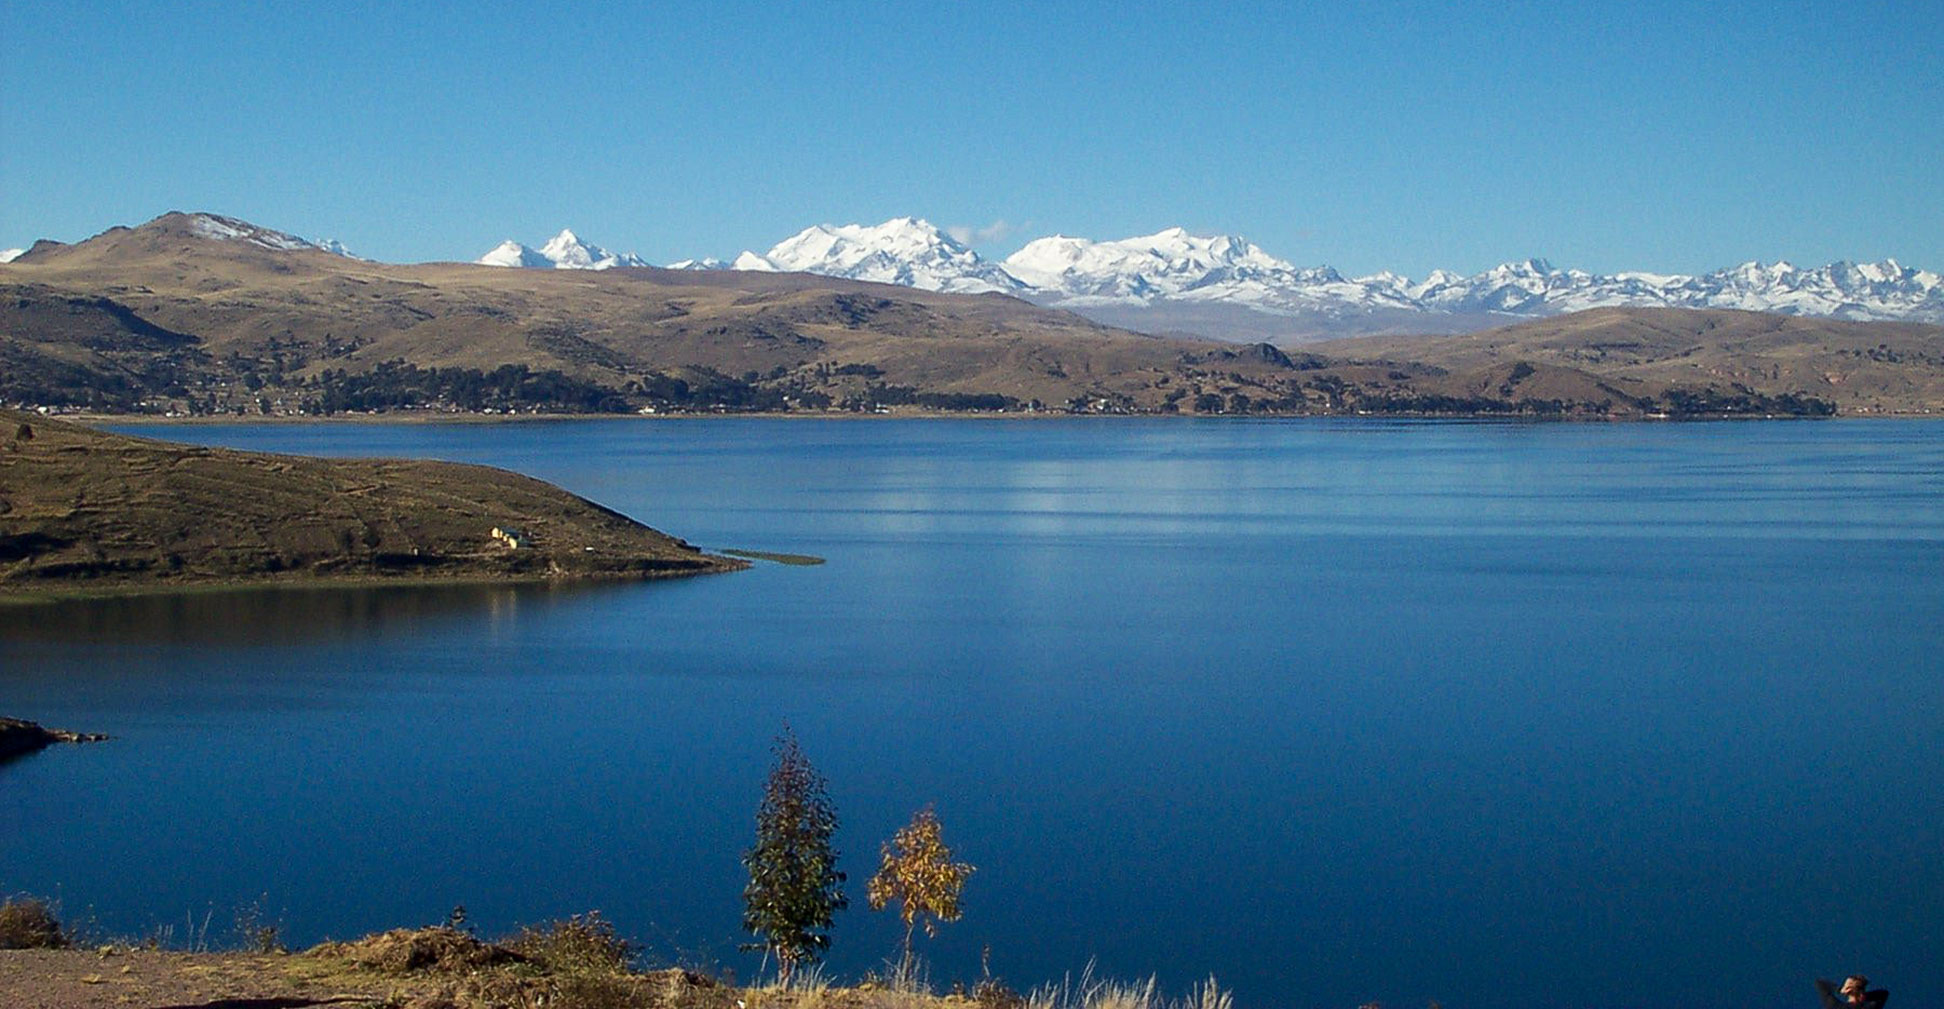 Lake Titicaca with the Andes mountain chain in the background; the Chearoco and Chachacomani mountains in the center.